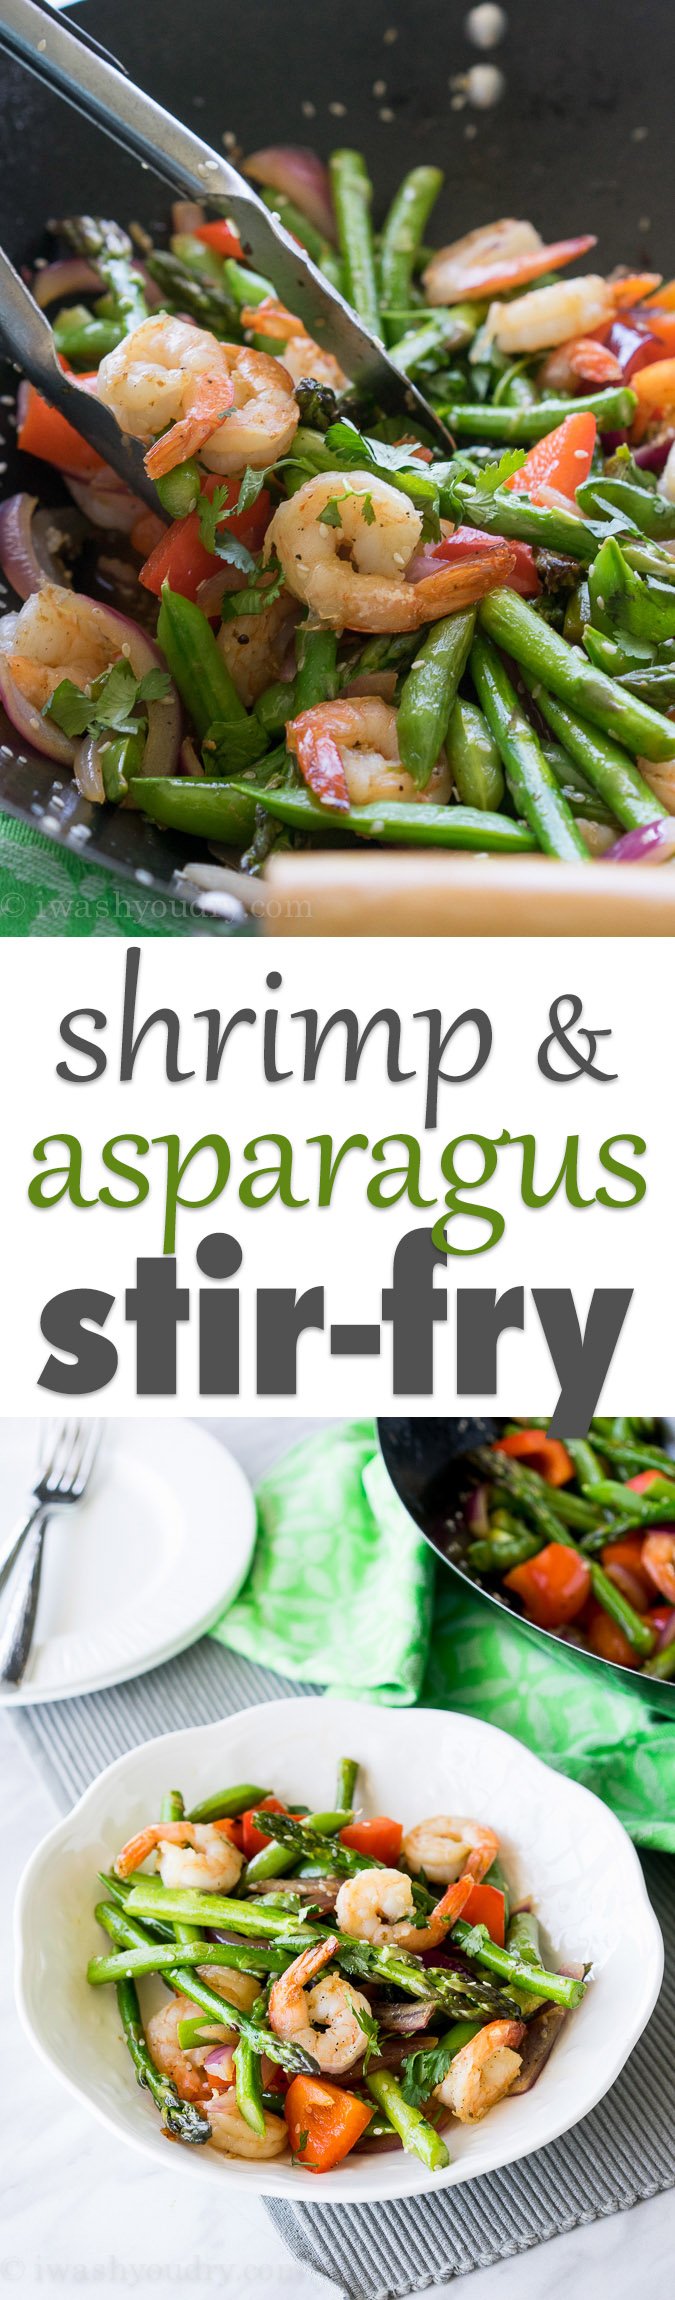 Shrimp and Asparagus Stir-Fry! Ready in less than 30 minutes, light and fresh!!